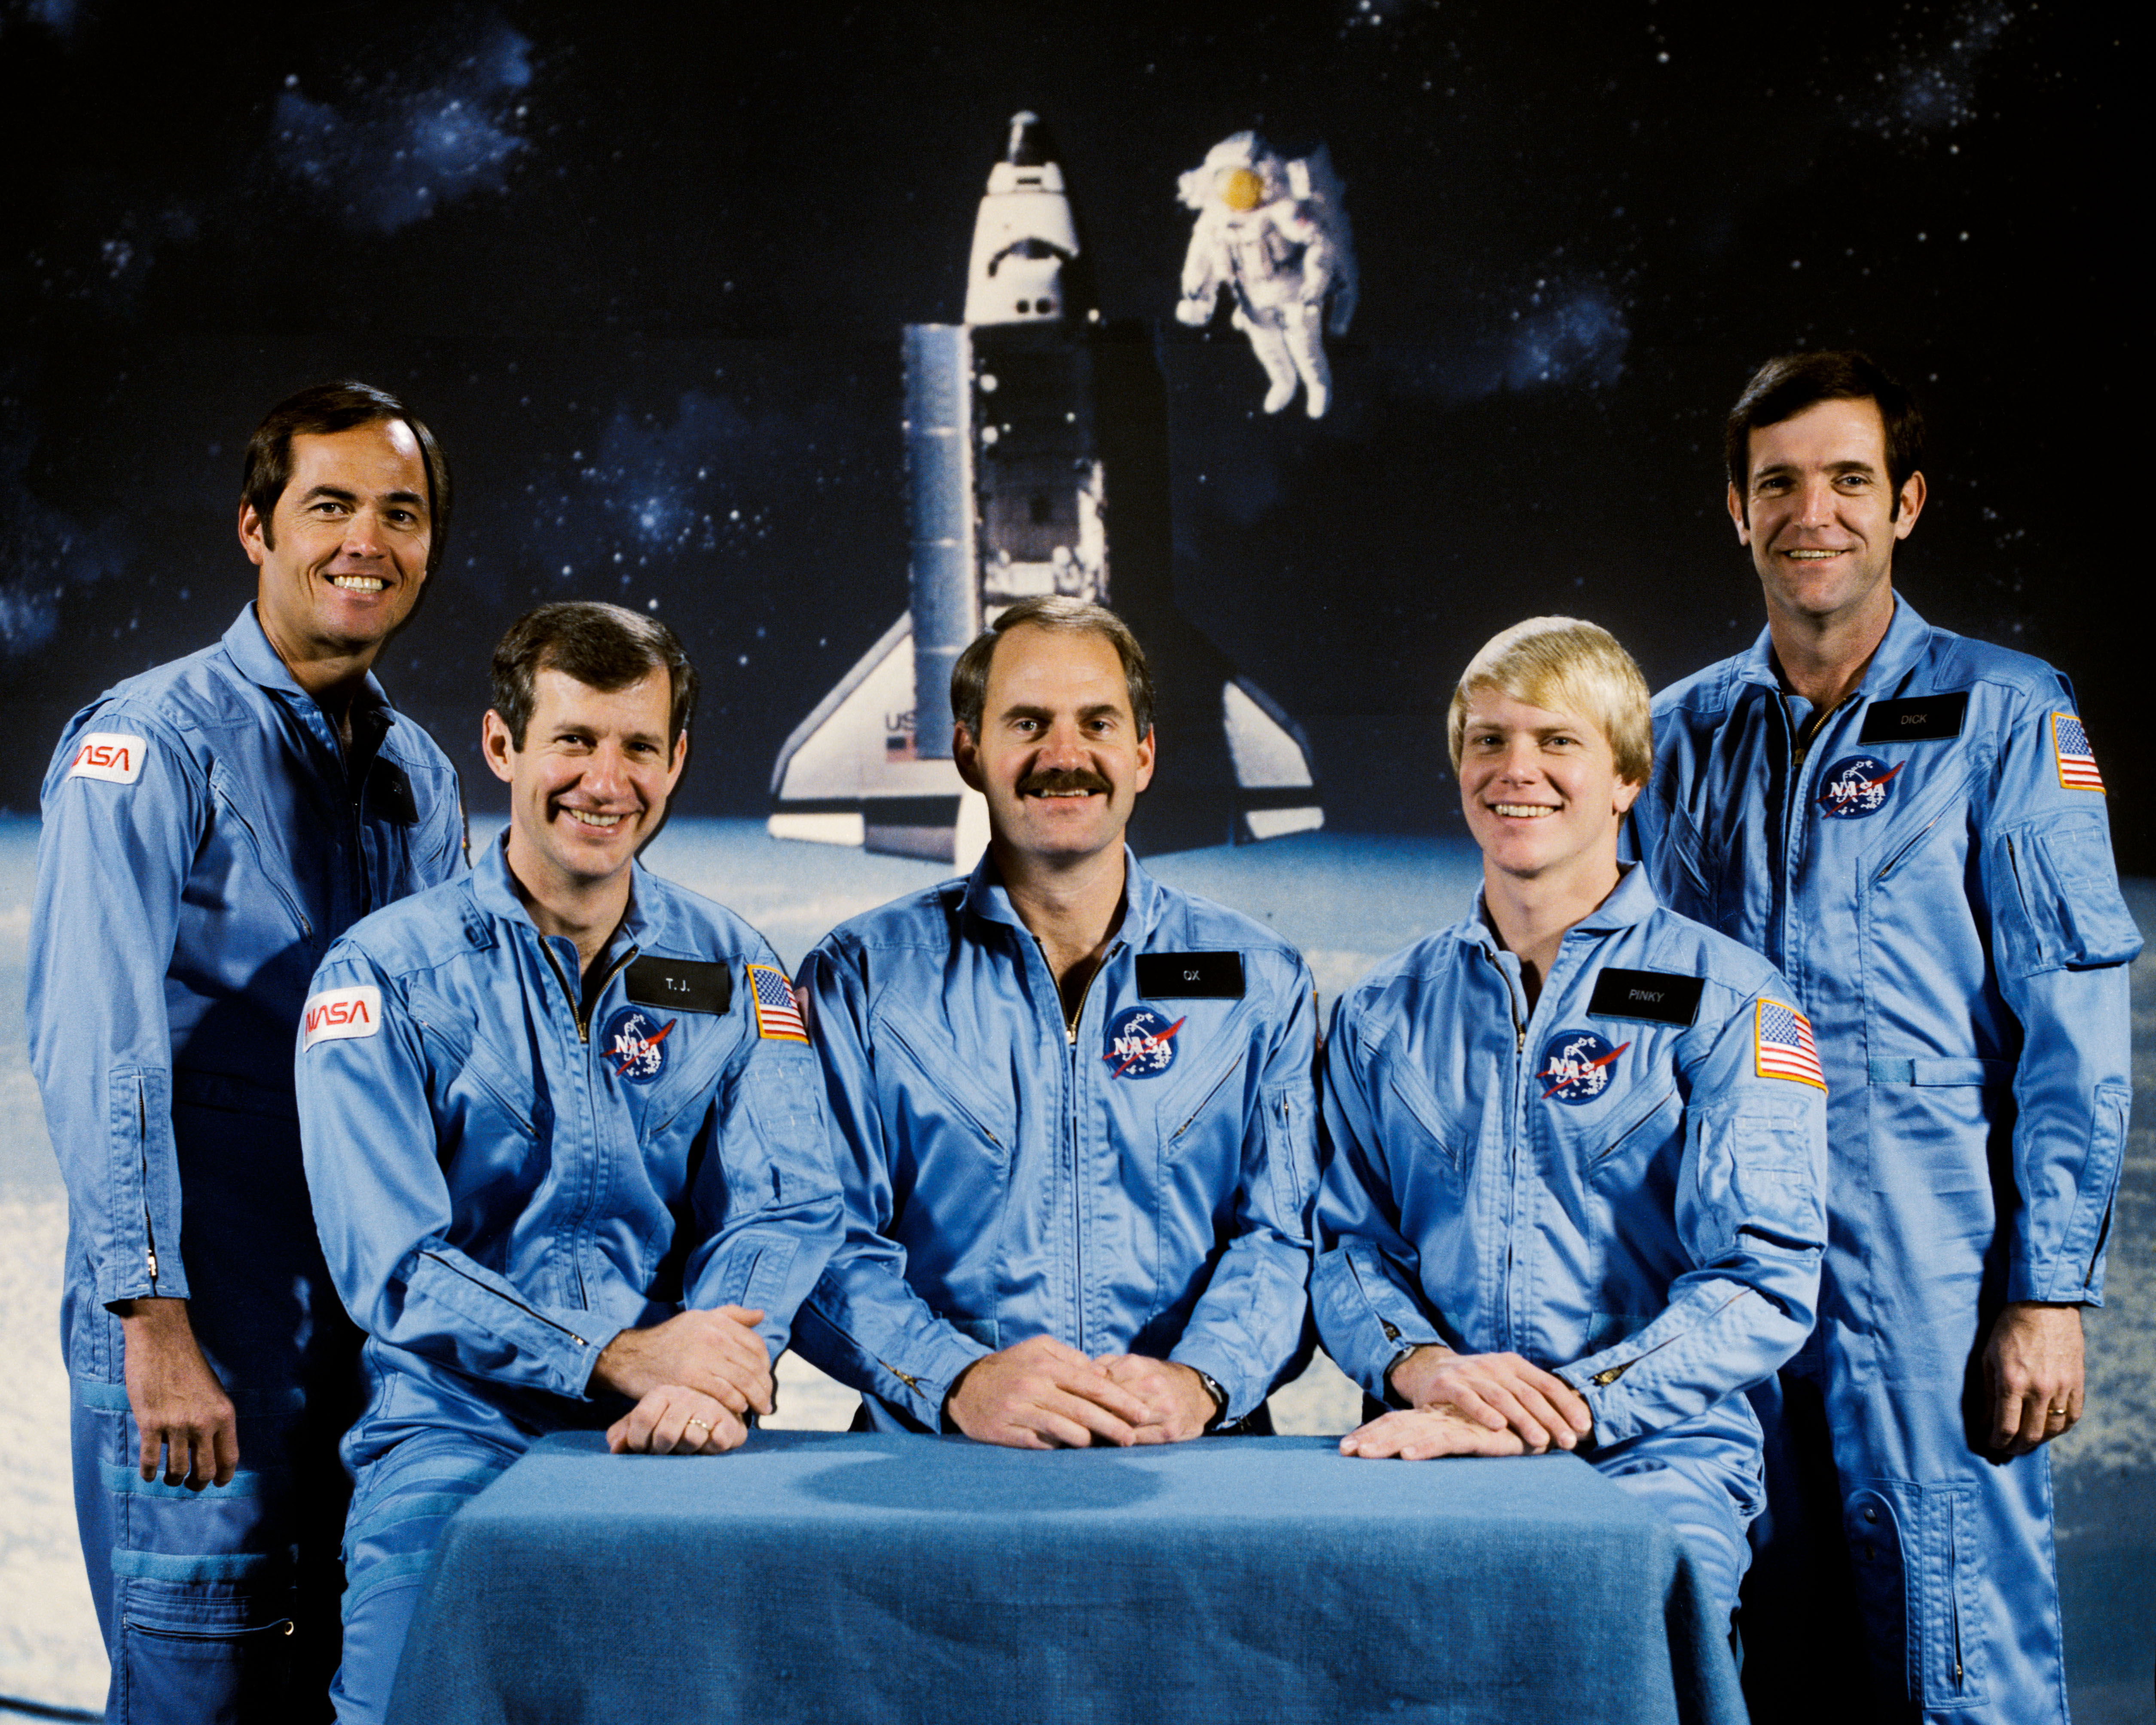 The STS-41C crew of (clockwise from bottom left) Commander Robert L. Crippen, Mission Specialists Terry J. Hart, James D. 